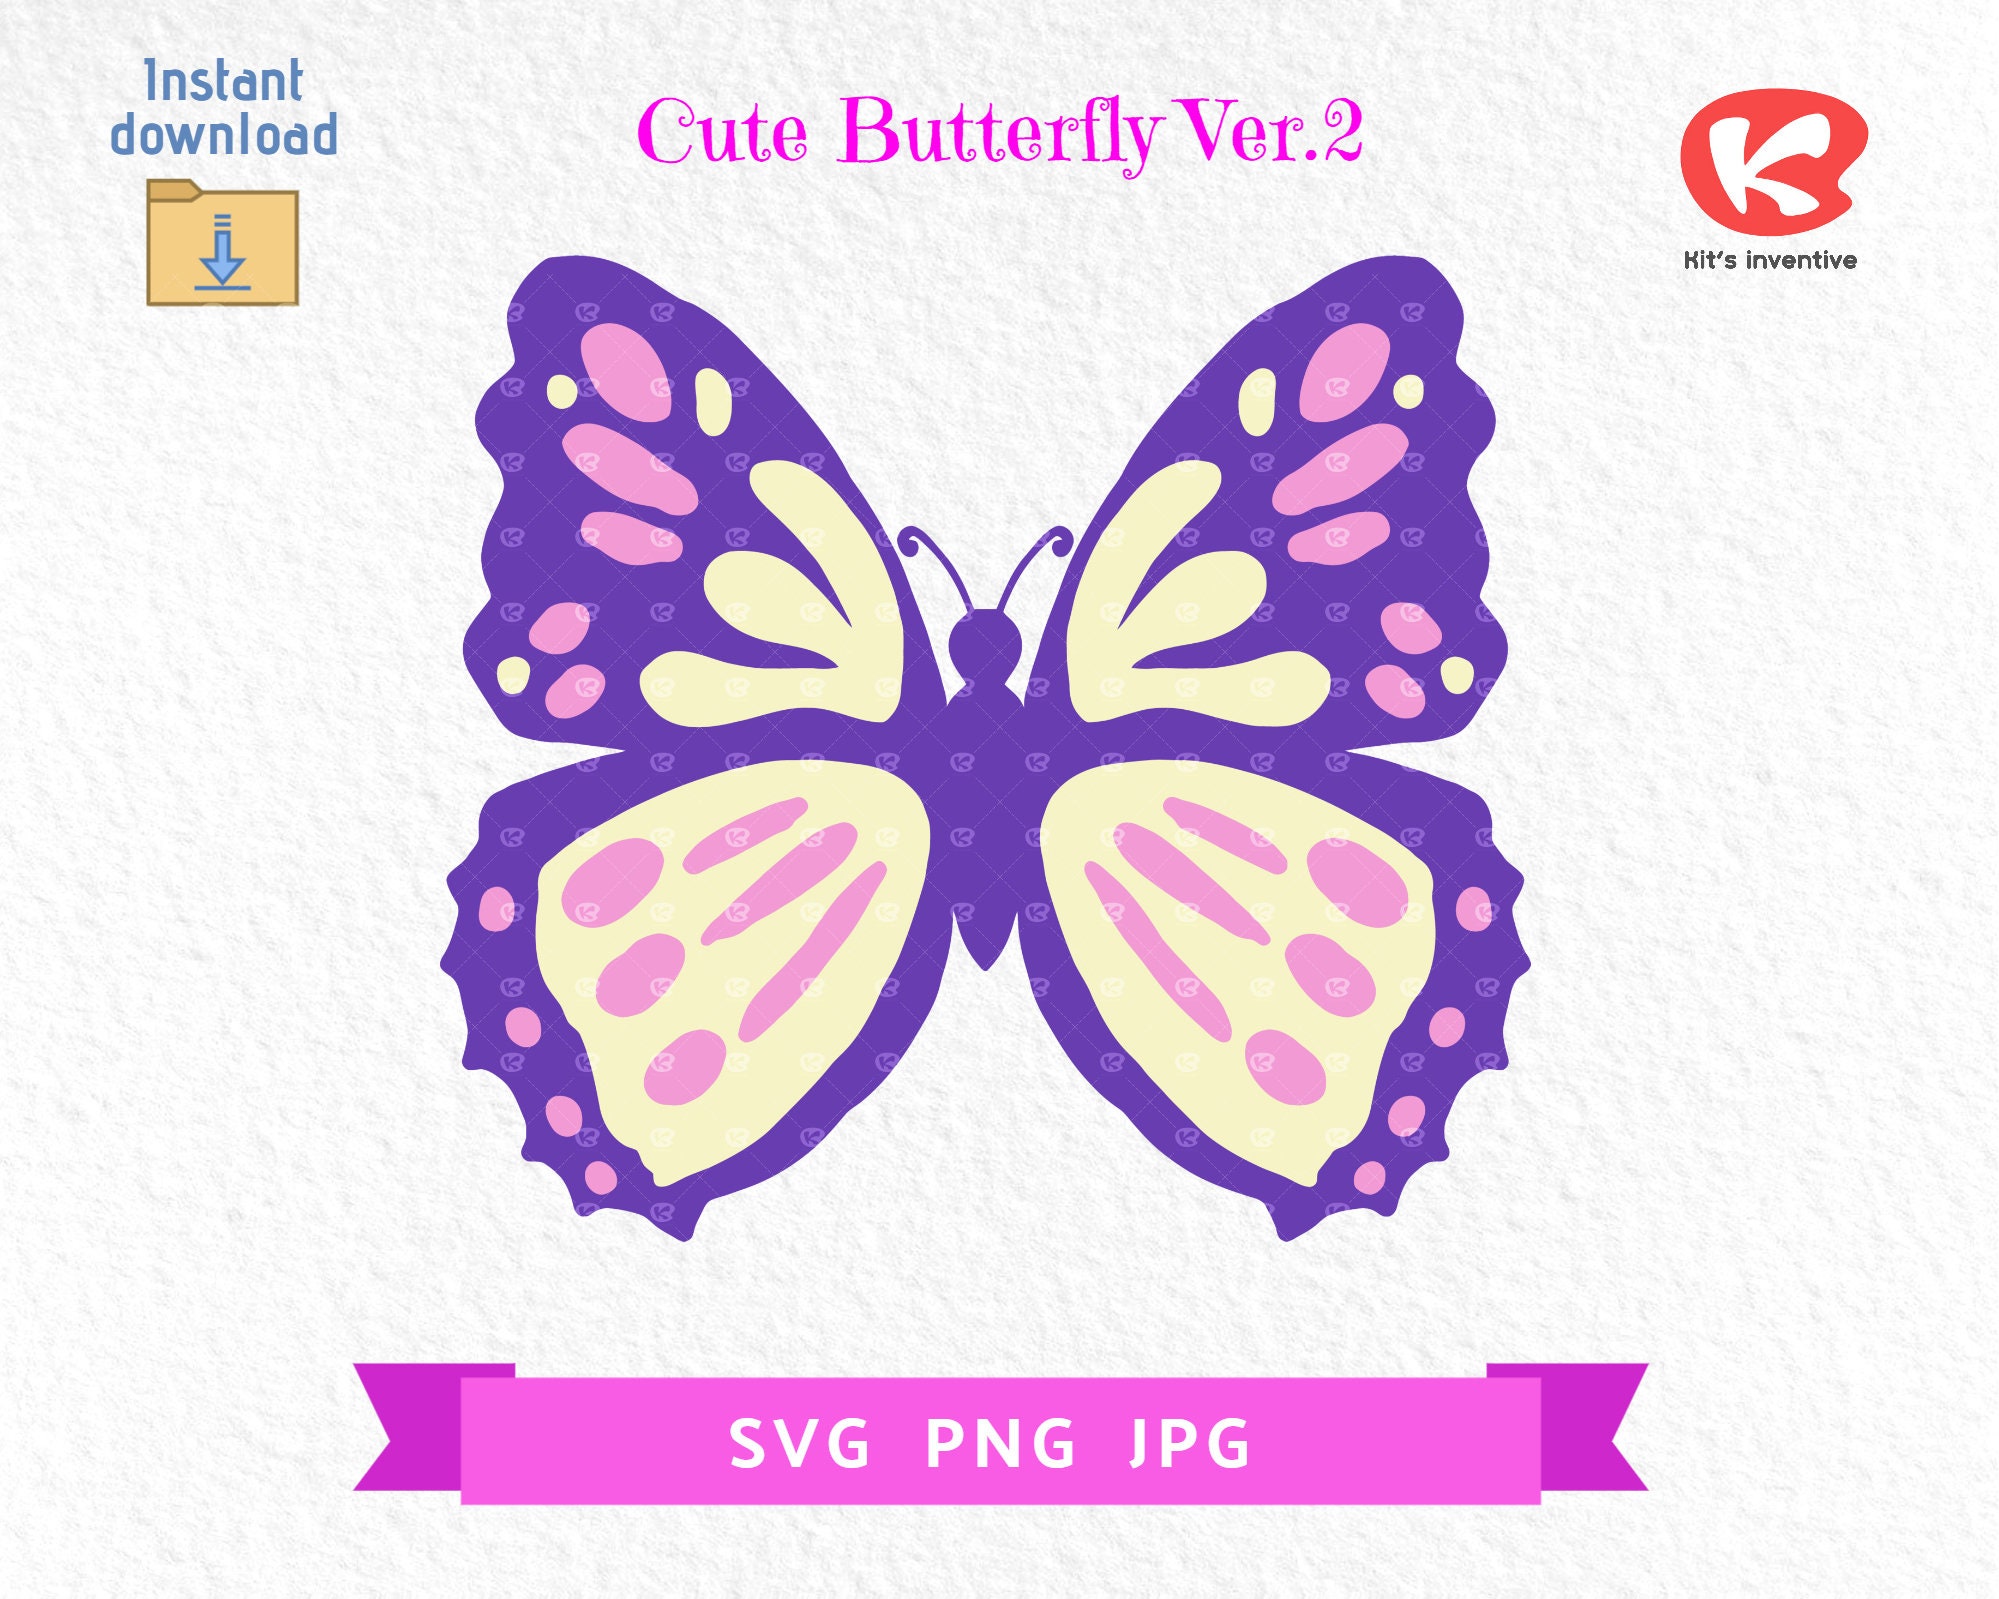 Cute butterfly ver.2 svg png jpg file clipart vector stencil | Etsy